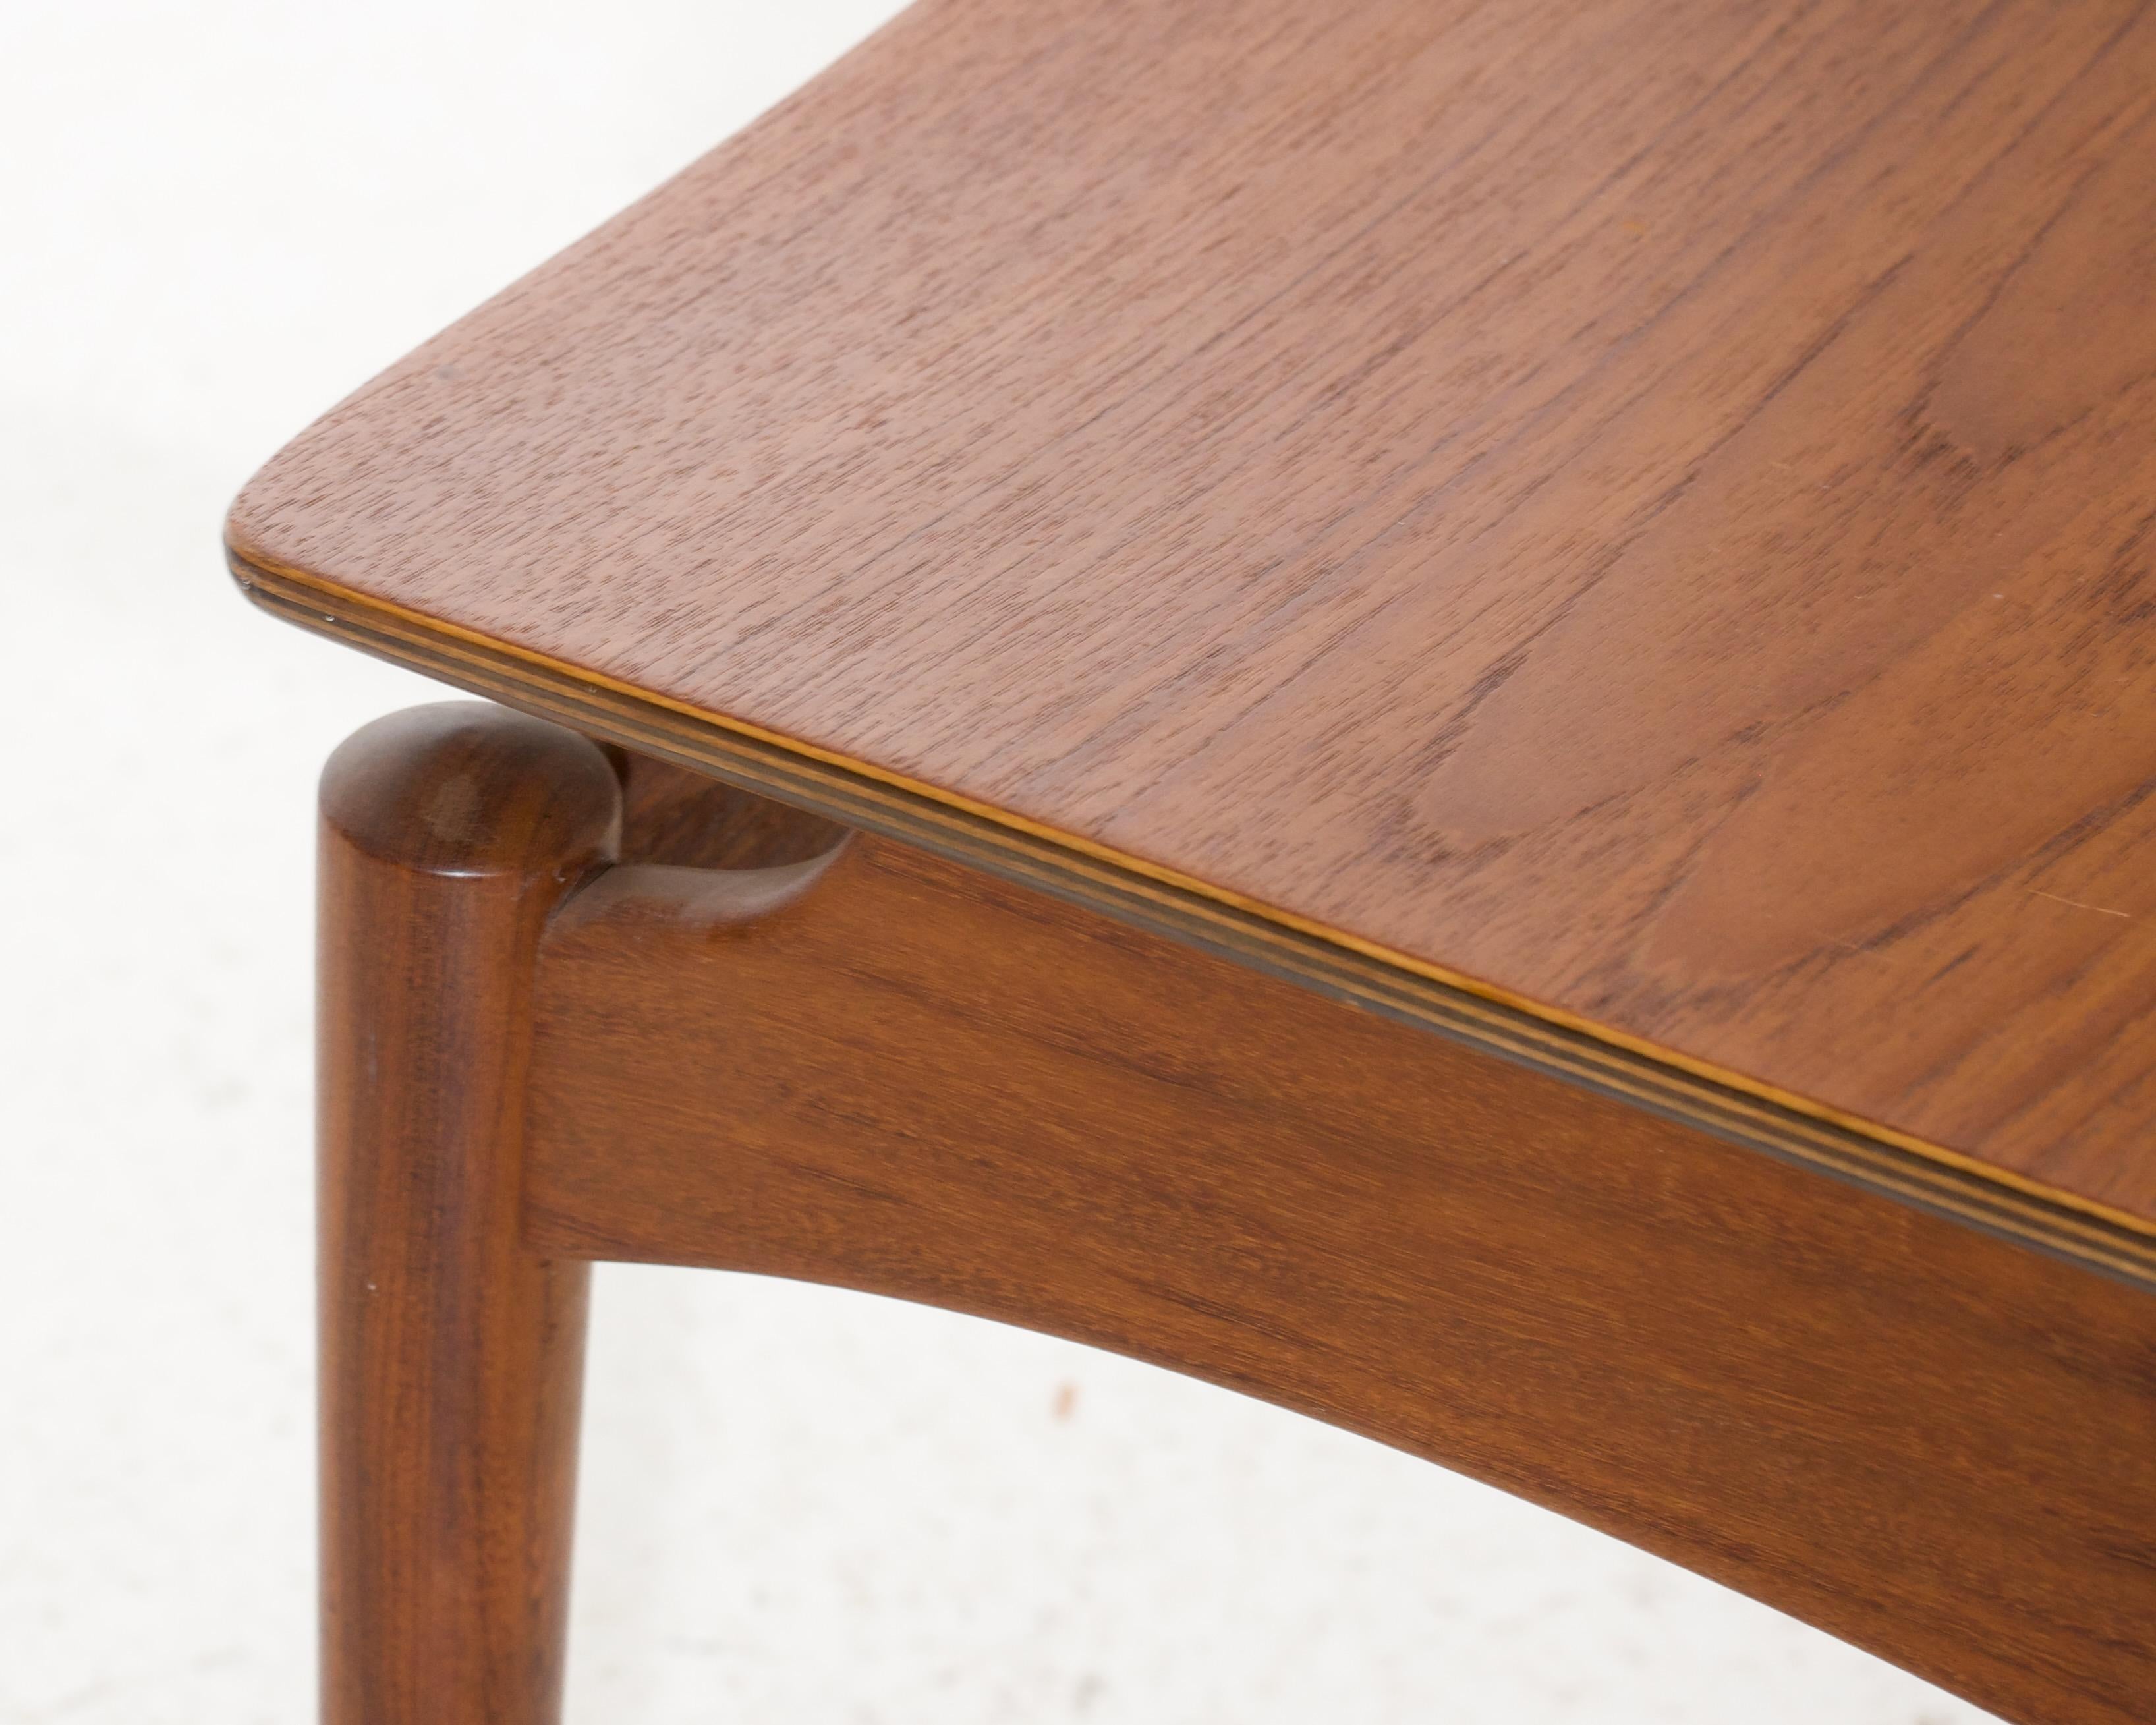 Fine Danish stool in teak, probably by one of the famous Danish 1960s architects.